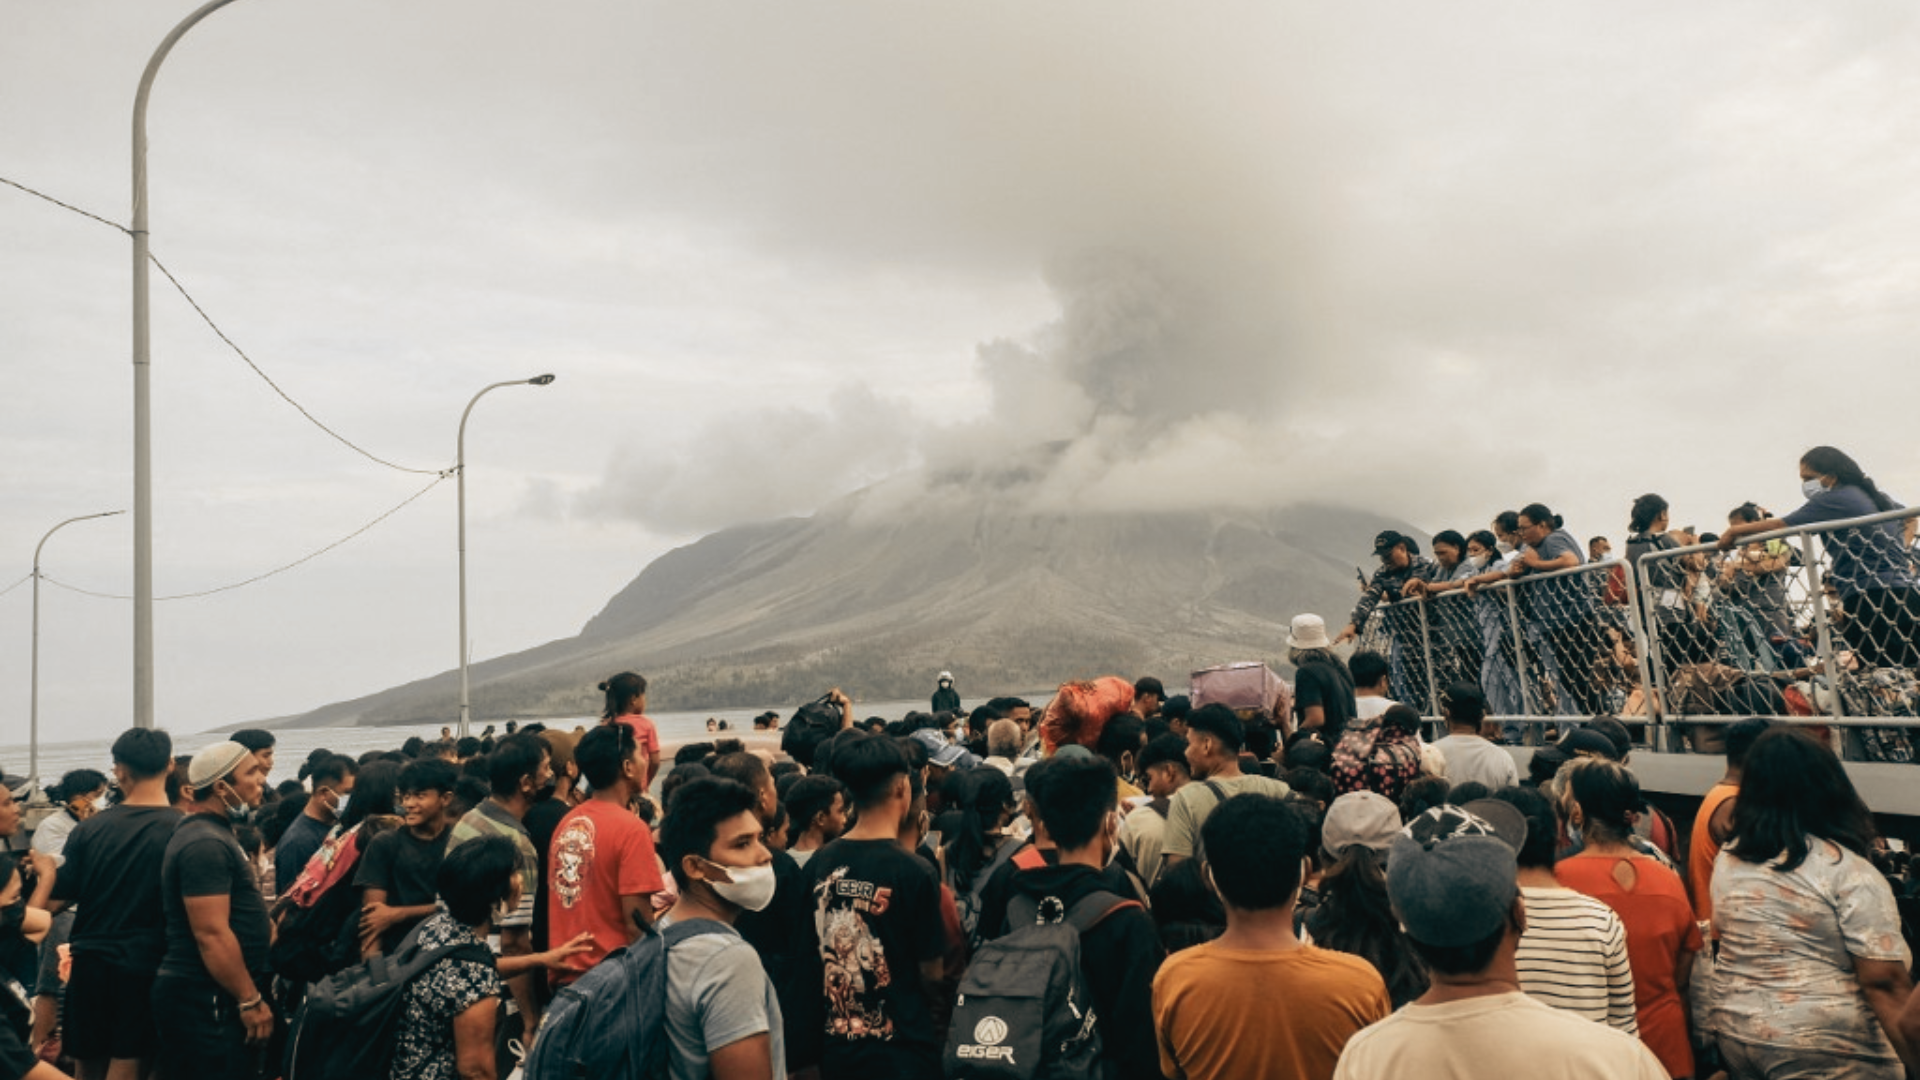 Indonesian Authorities To Move Entire Island Community Due To Volcanic Eruption Risk